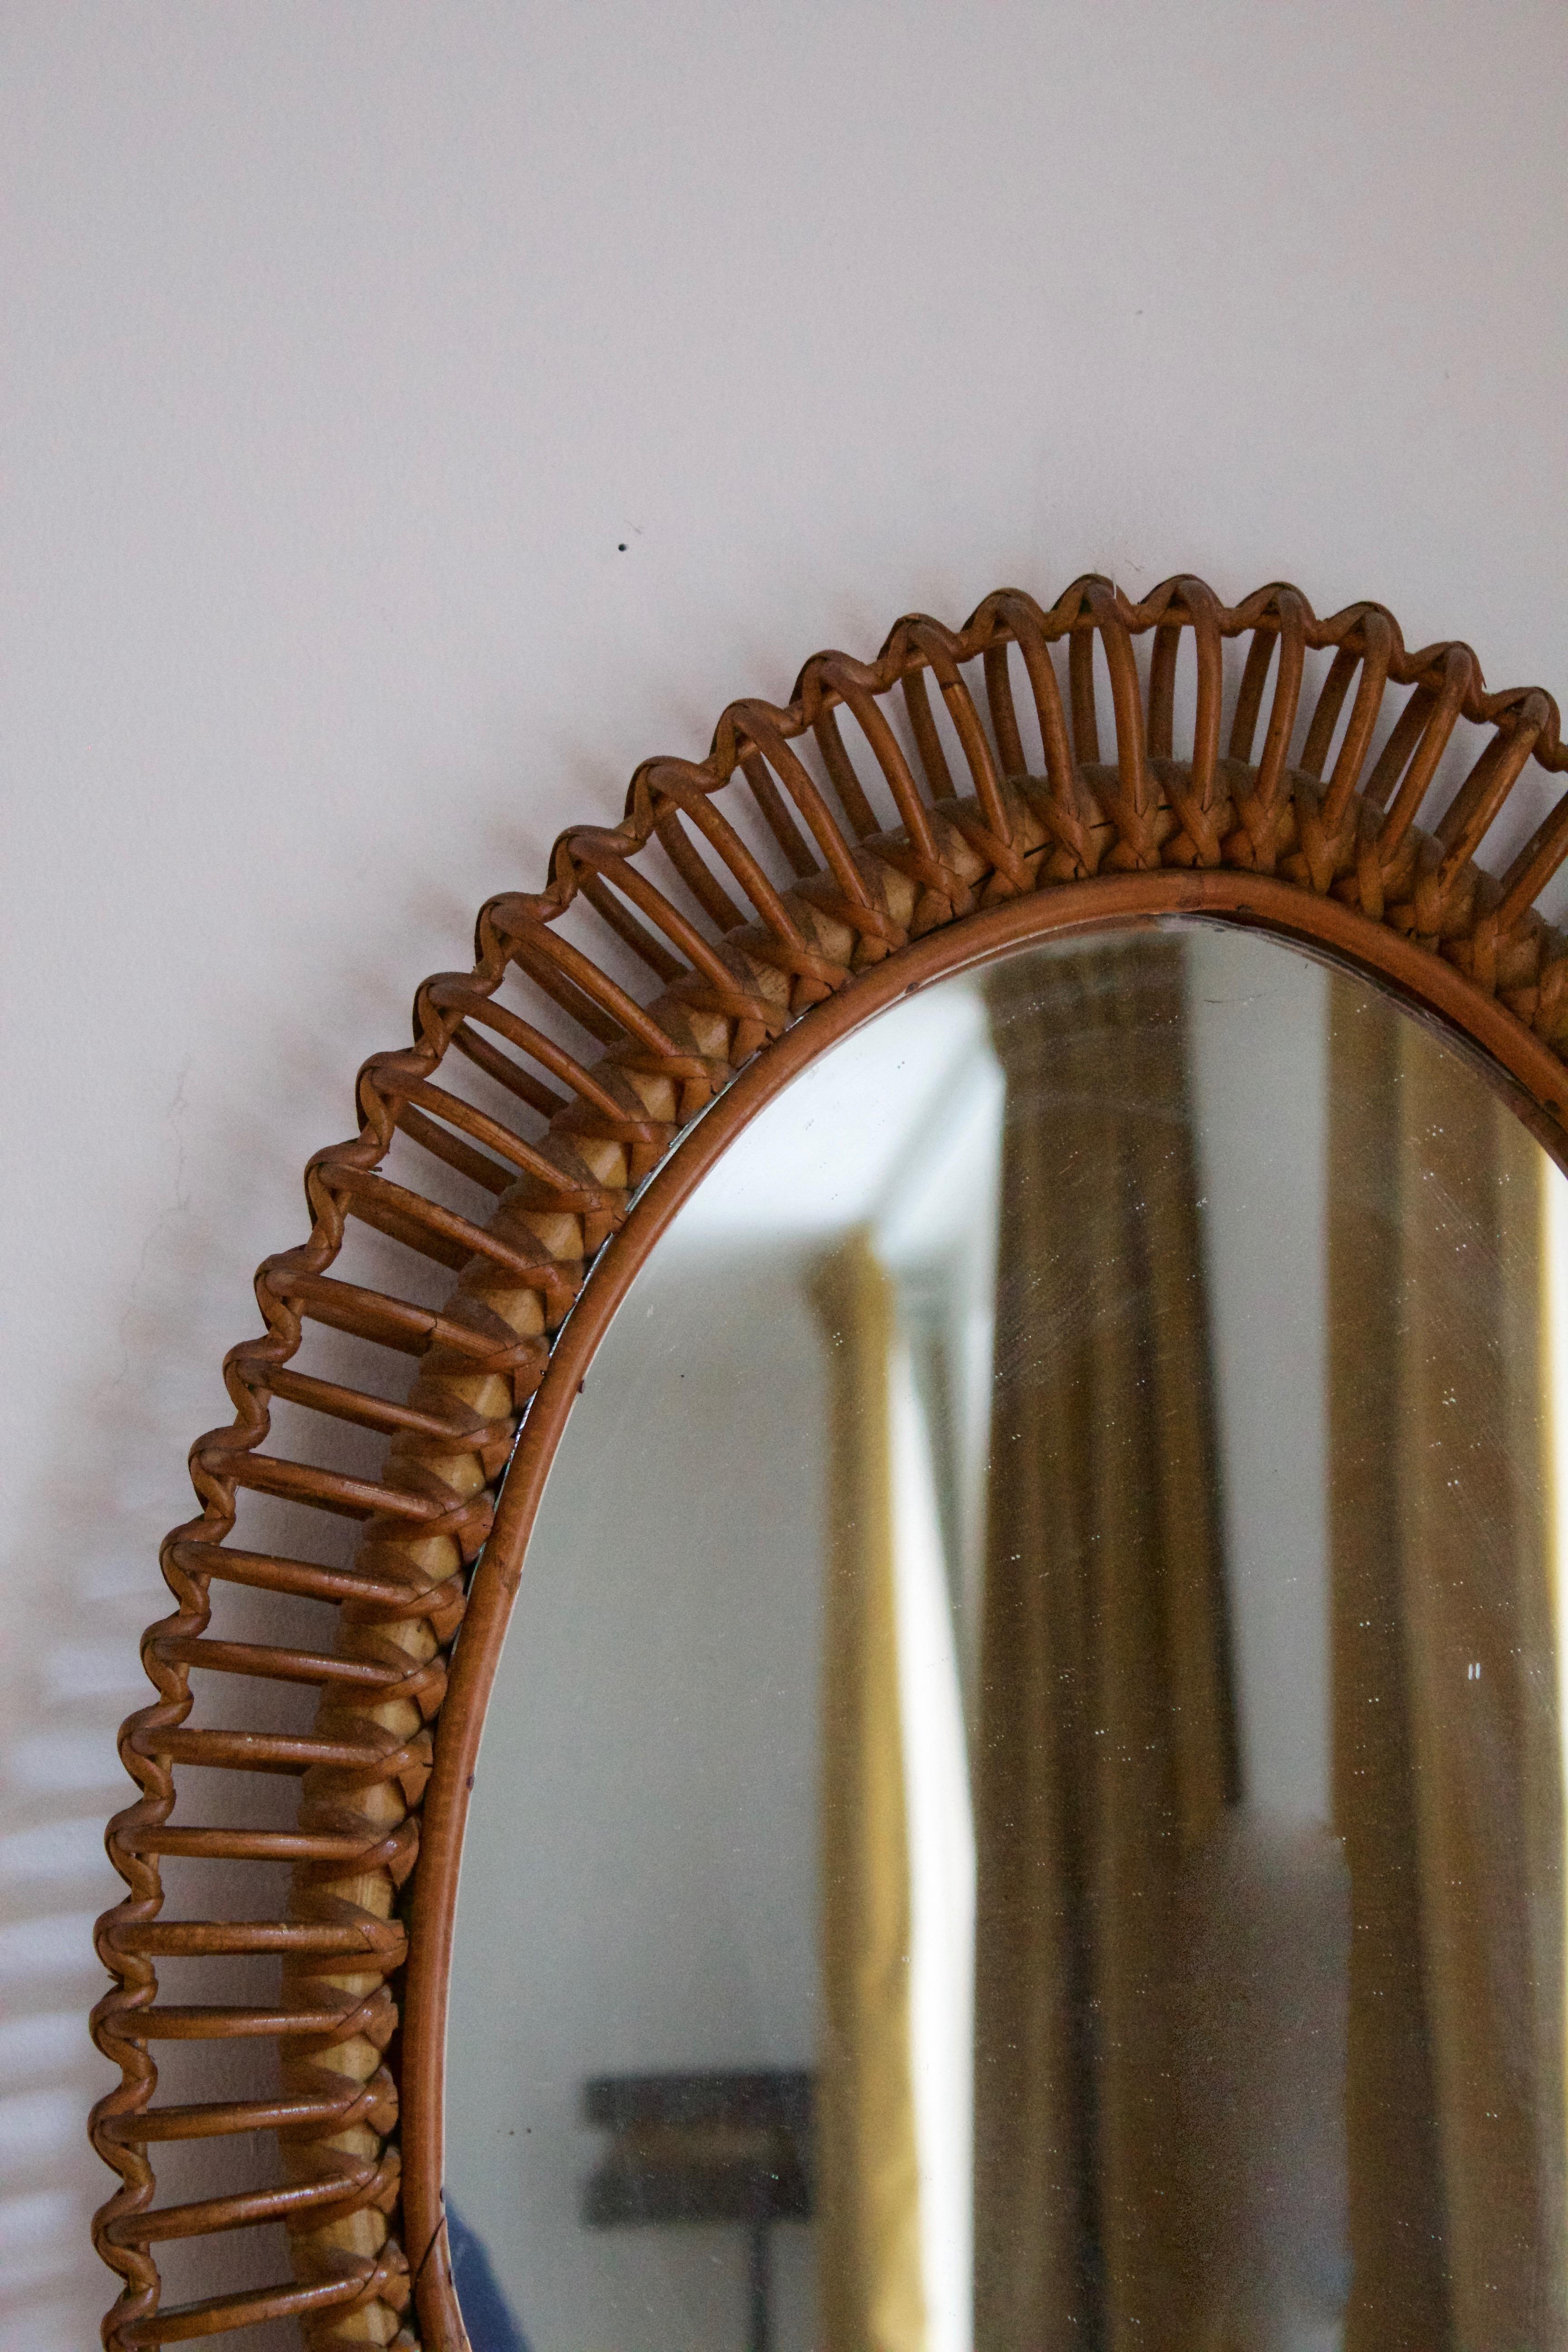 A wall mirror, produced in Italy, 1950s. Cut mirror glass is framed in rattan.

Other designers of the period include Gio Ponti, Fontana Arte, Max Ingrand, Franco Albini, and Josef Frank.